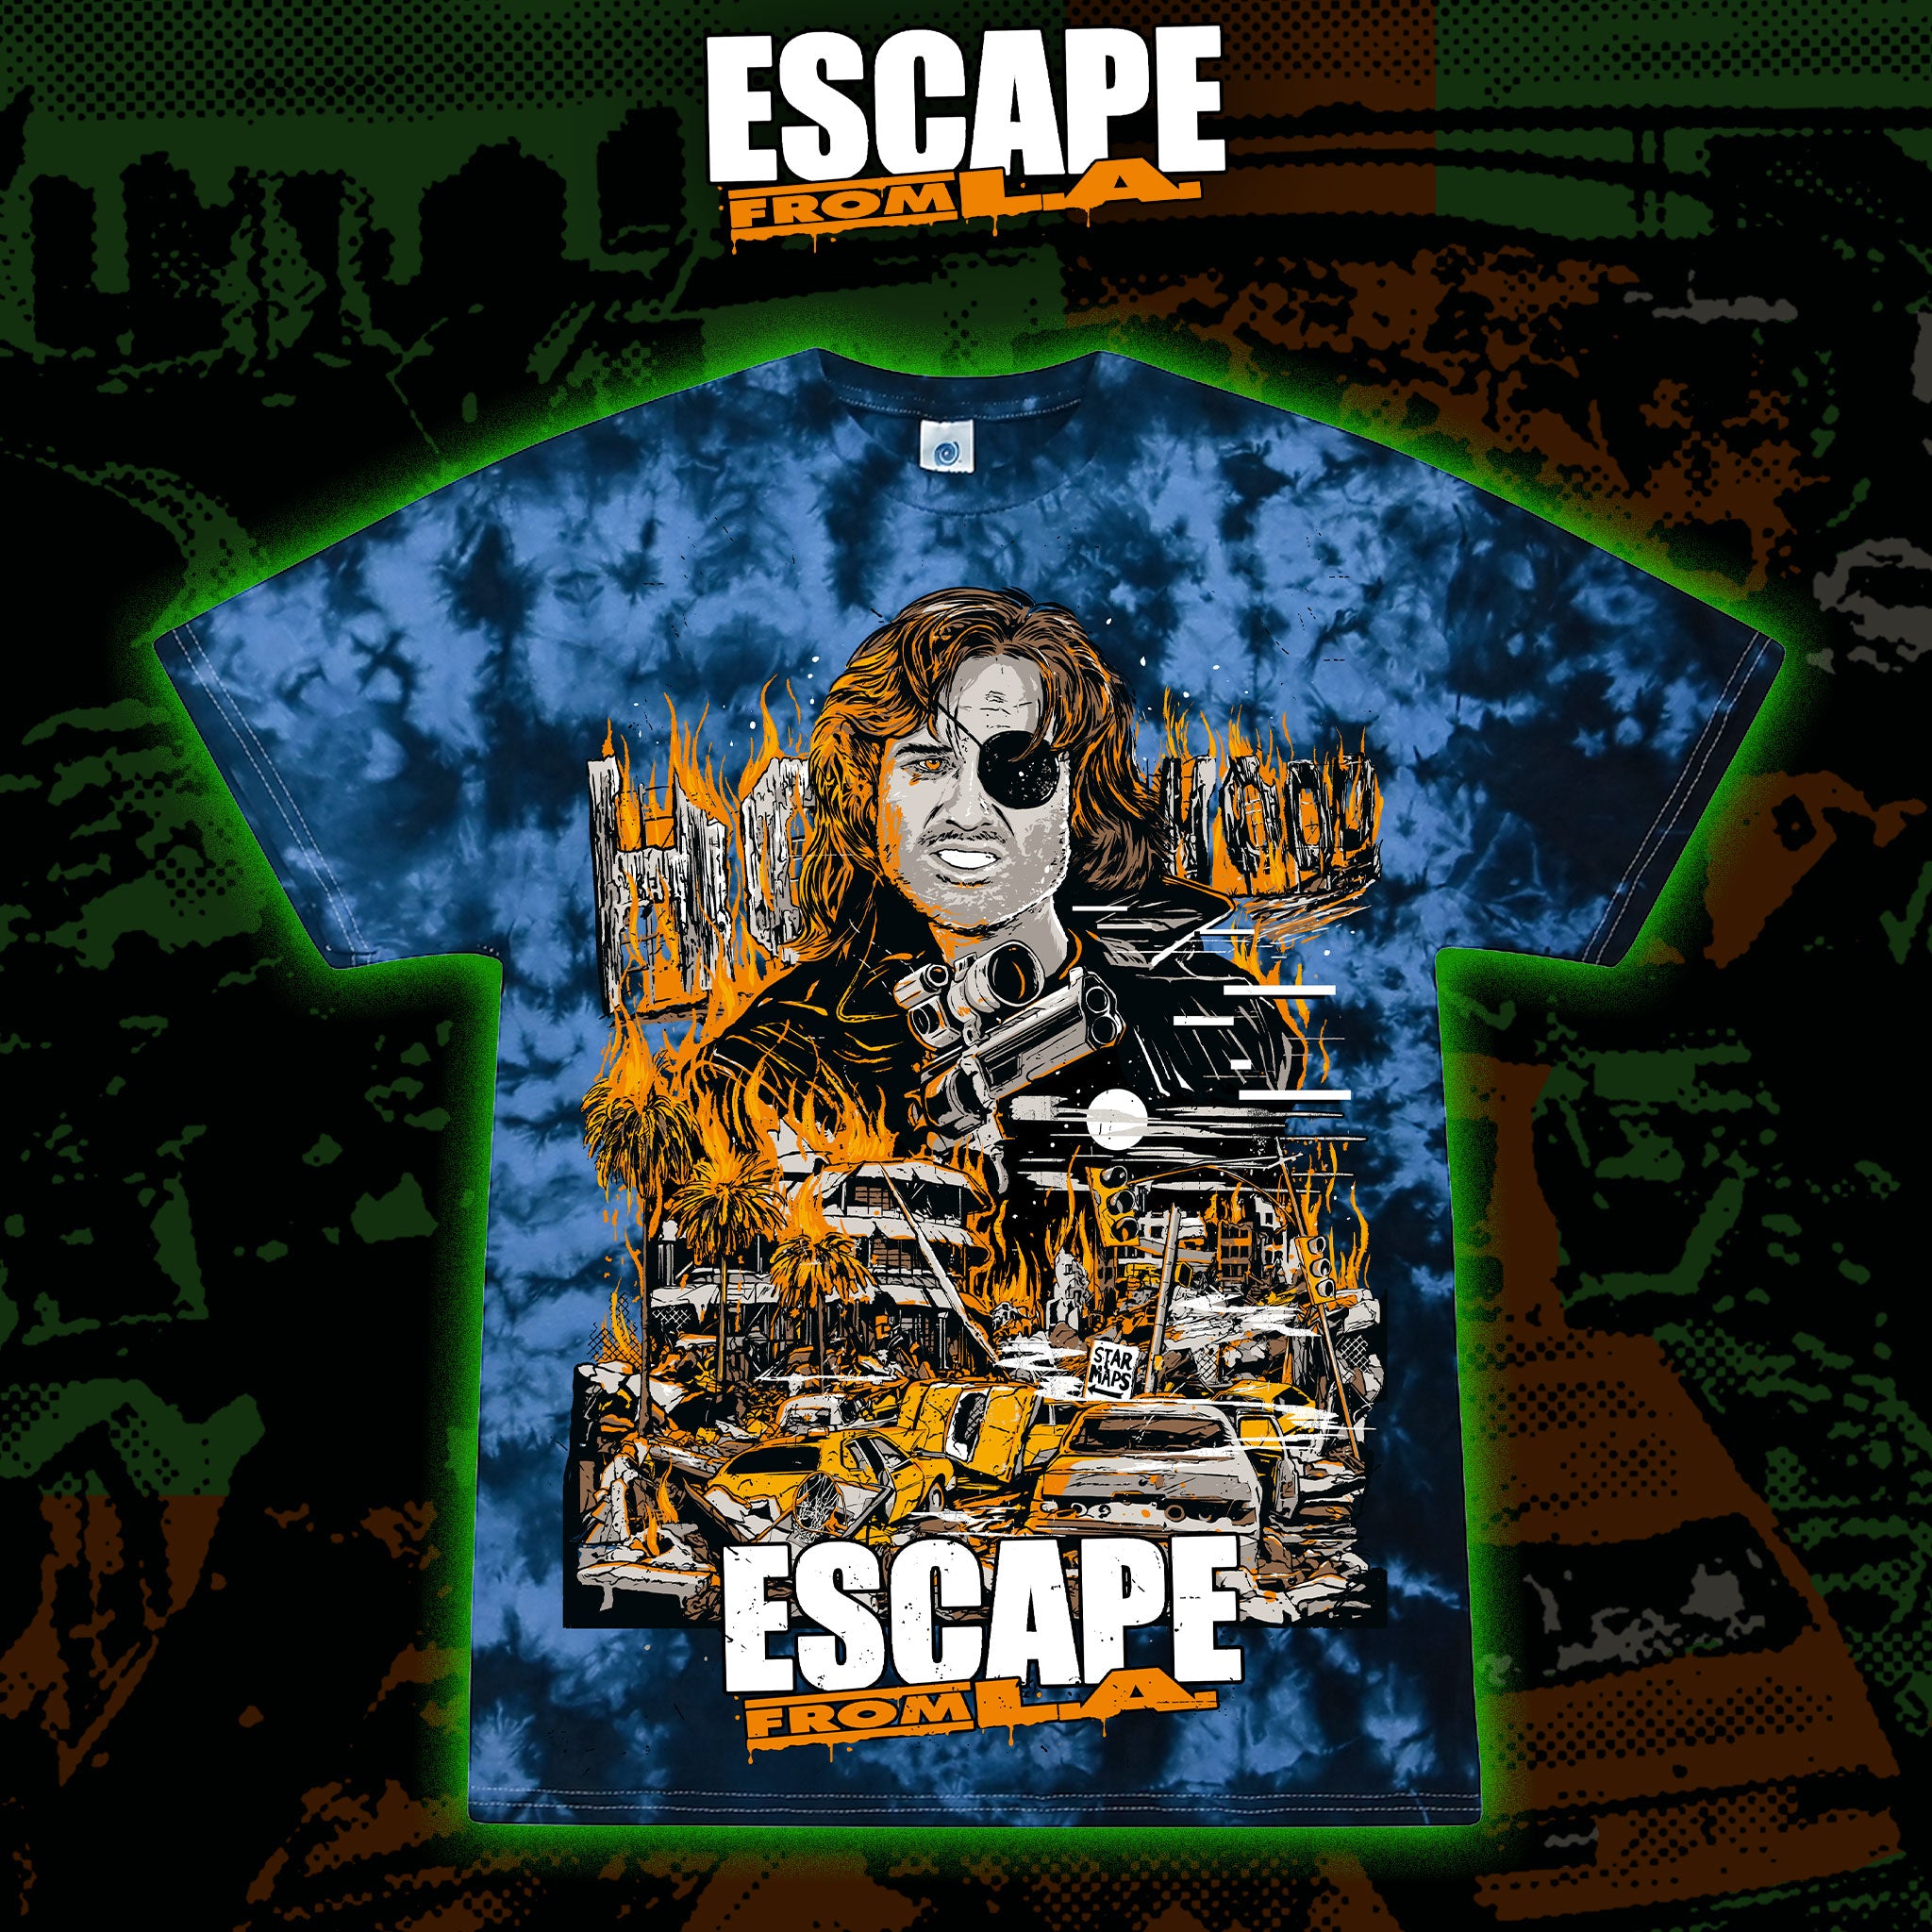 Escape from L.A. "Welcome to the Human Race" Tie dye